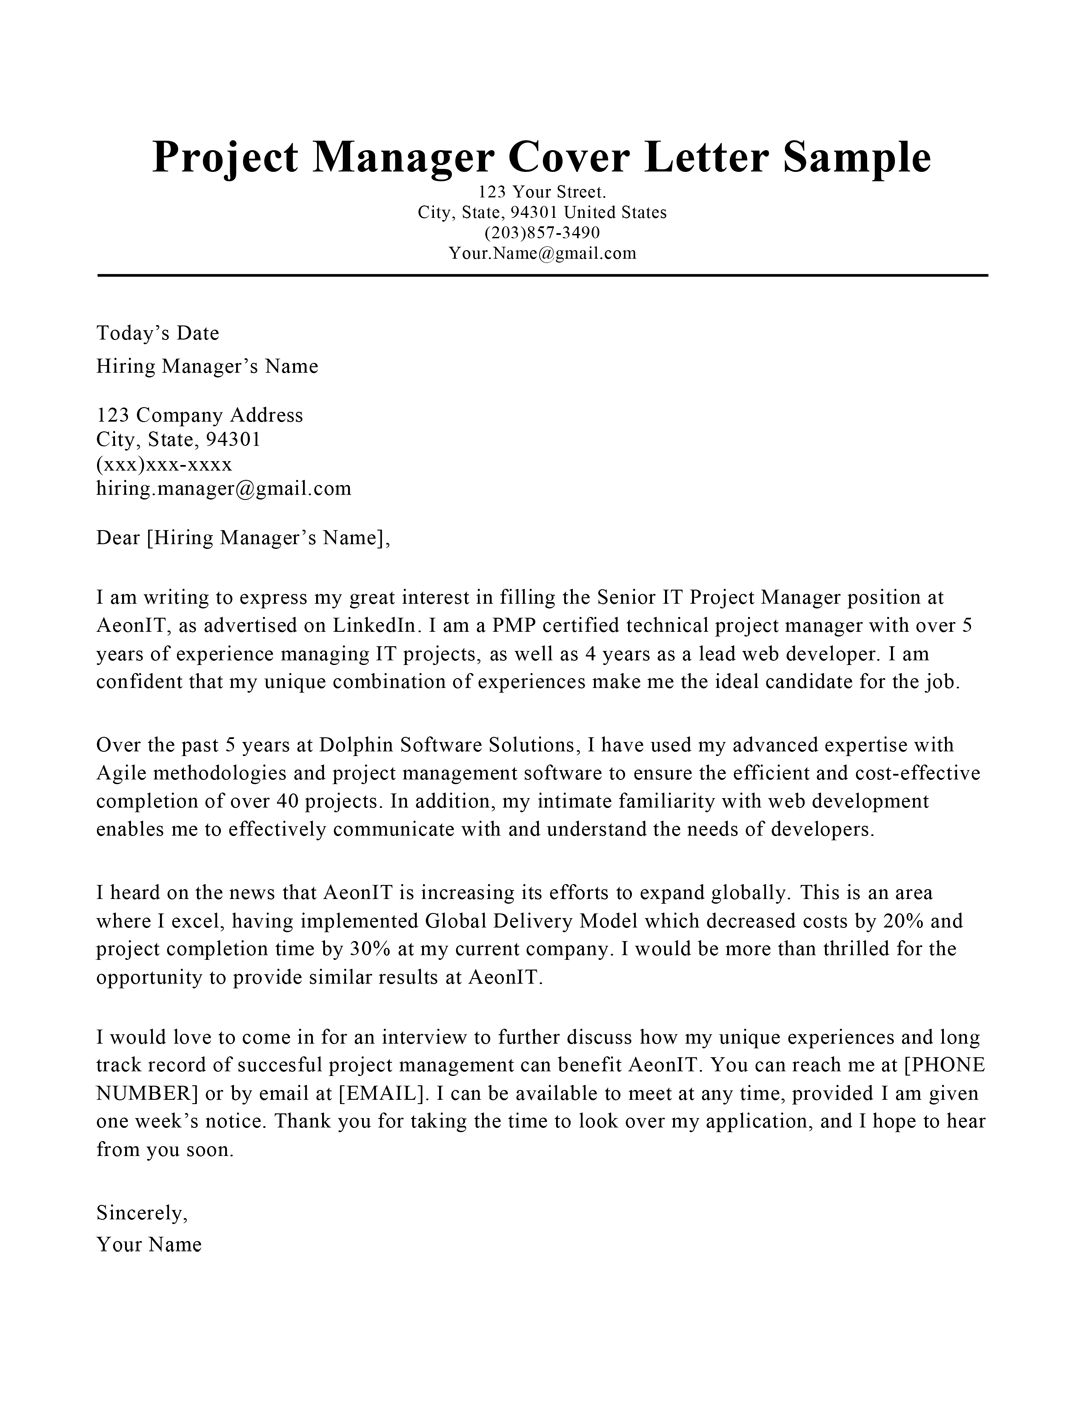 application letter of an manager